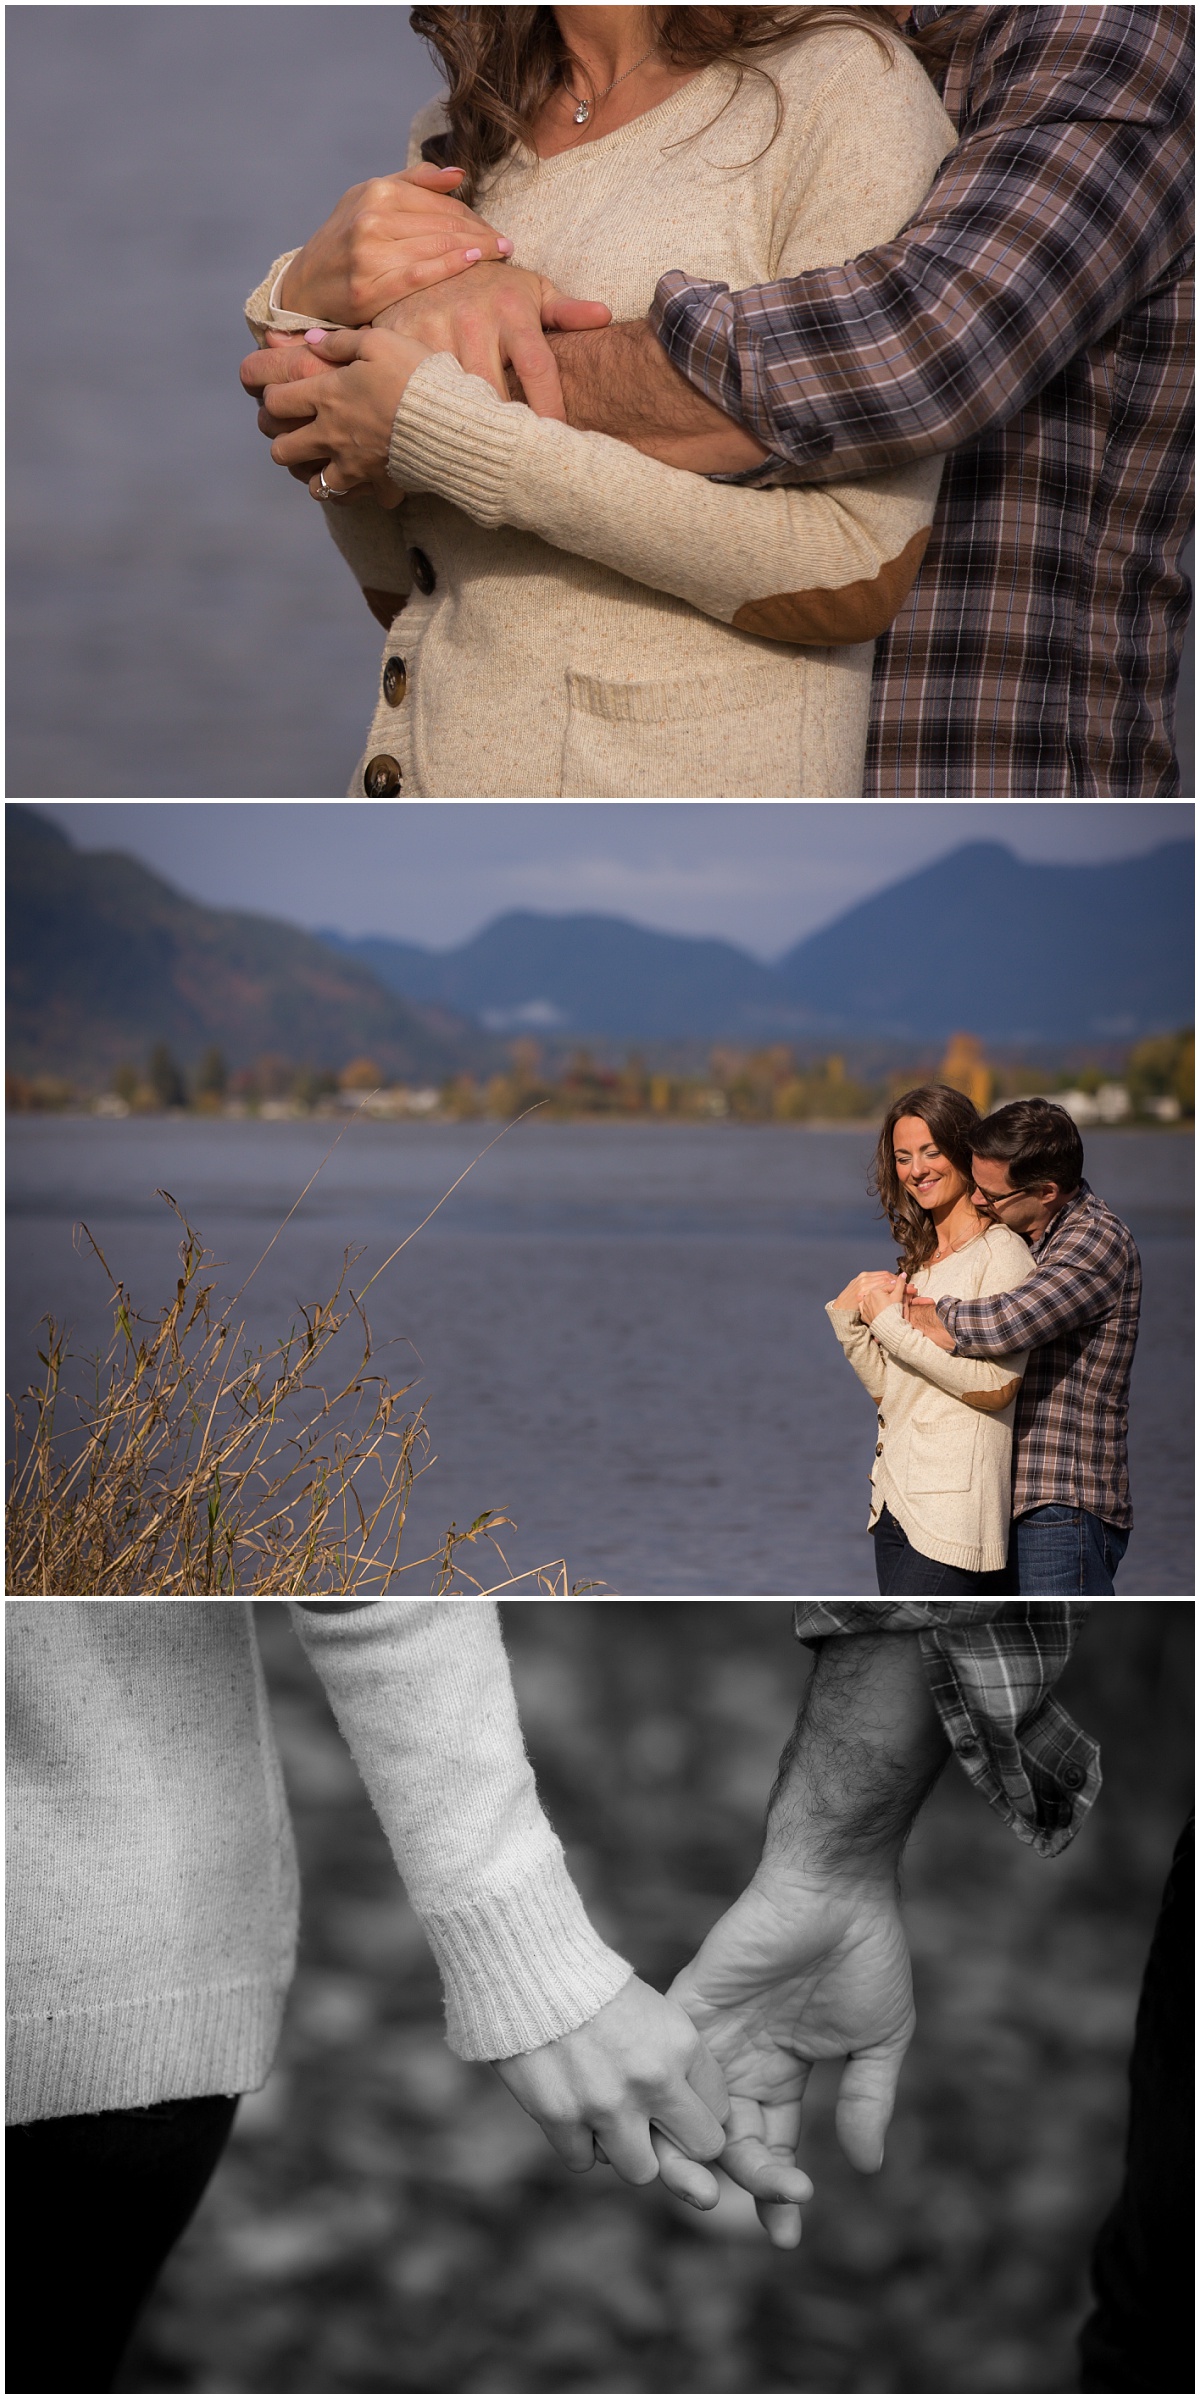 Amazing Day Photography - Mission Engagement Session - Hatzic Lake - Cascade Falls -Blueberry Field - Fall Engagement Session - Fraser Valley Engagement Photographer (2).jpg